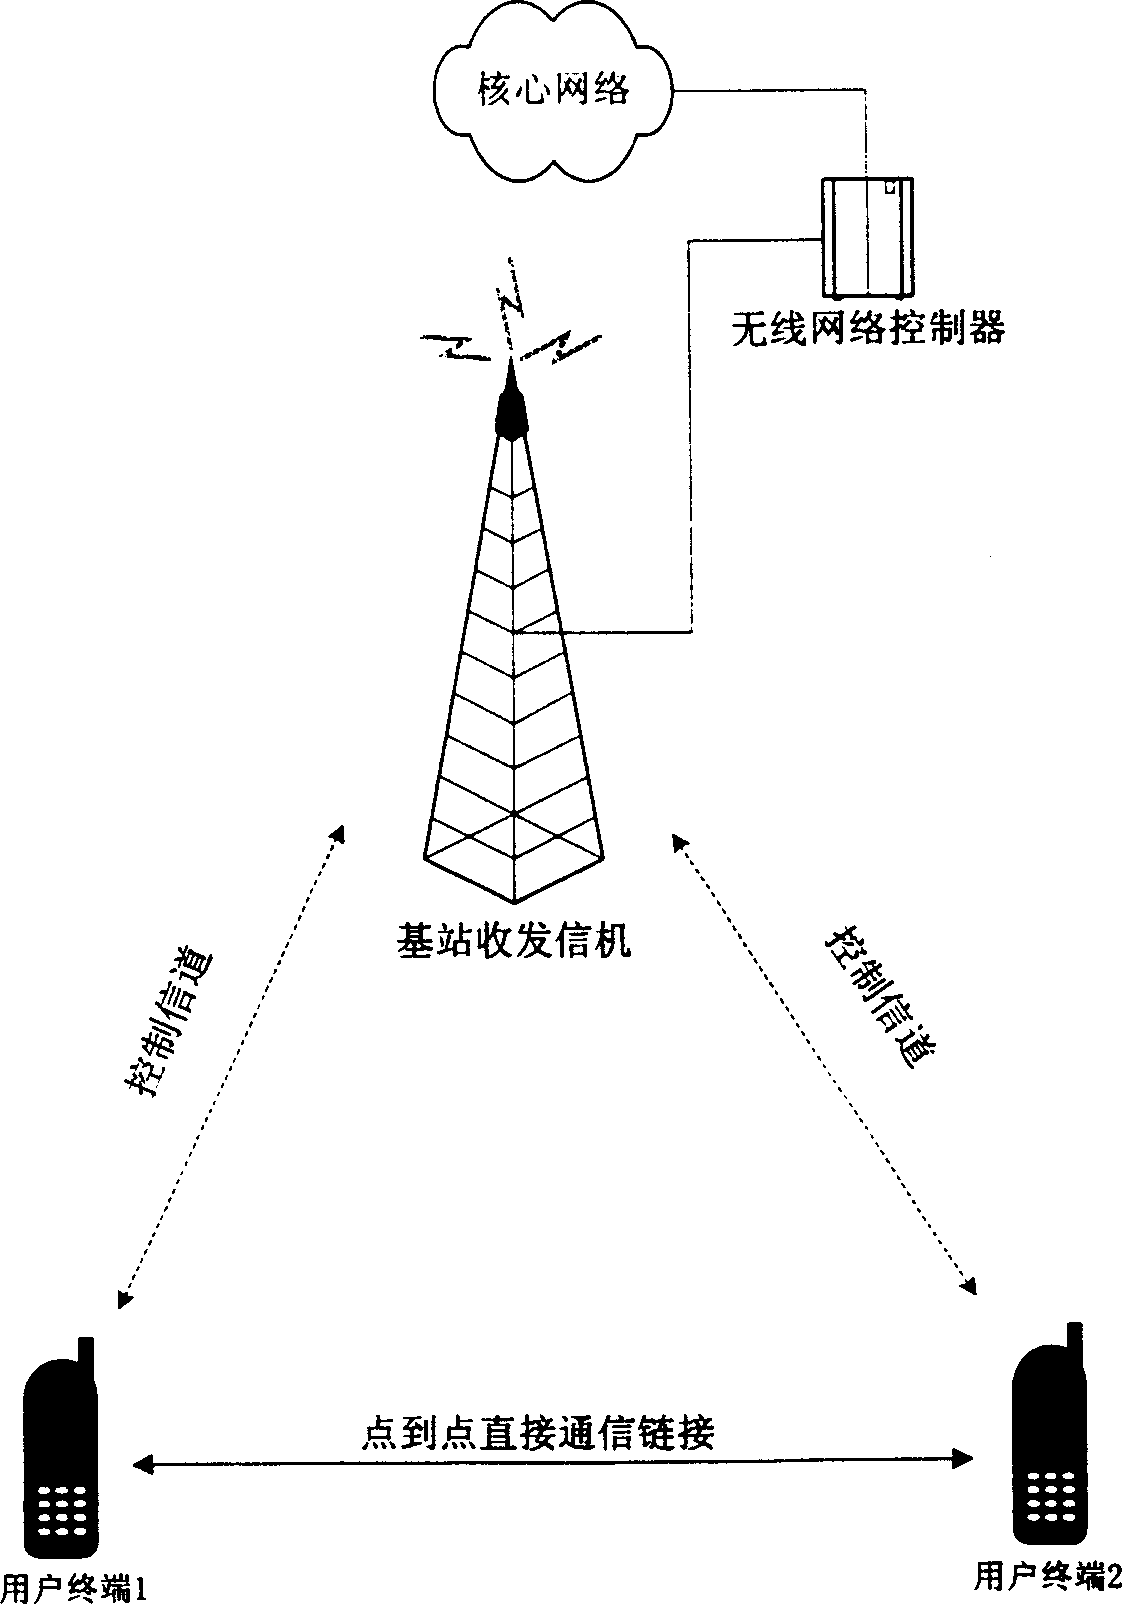 Method and apparatus for establishing and retaining point-to-point communication radio chaining in radio communication network